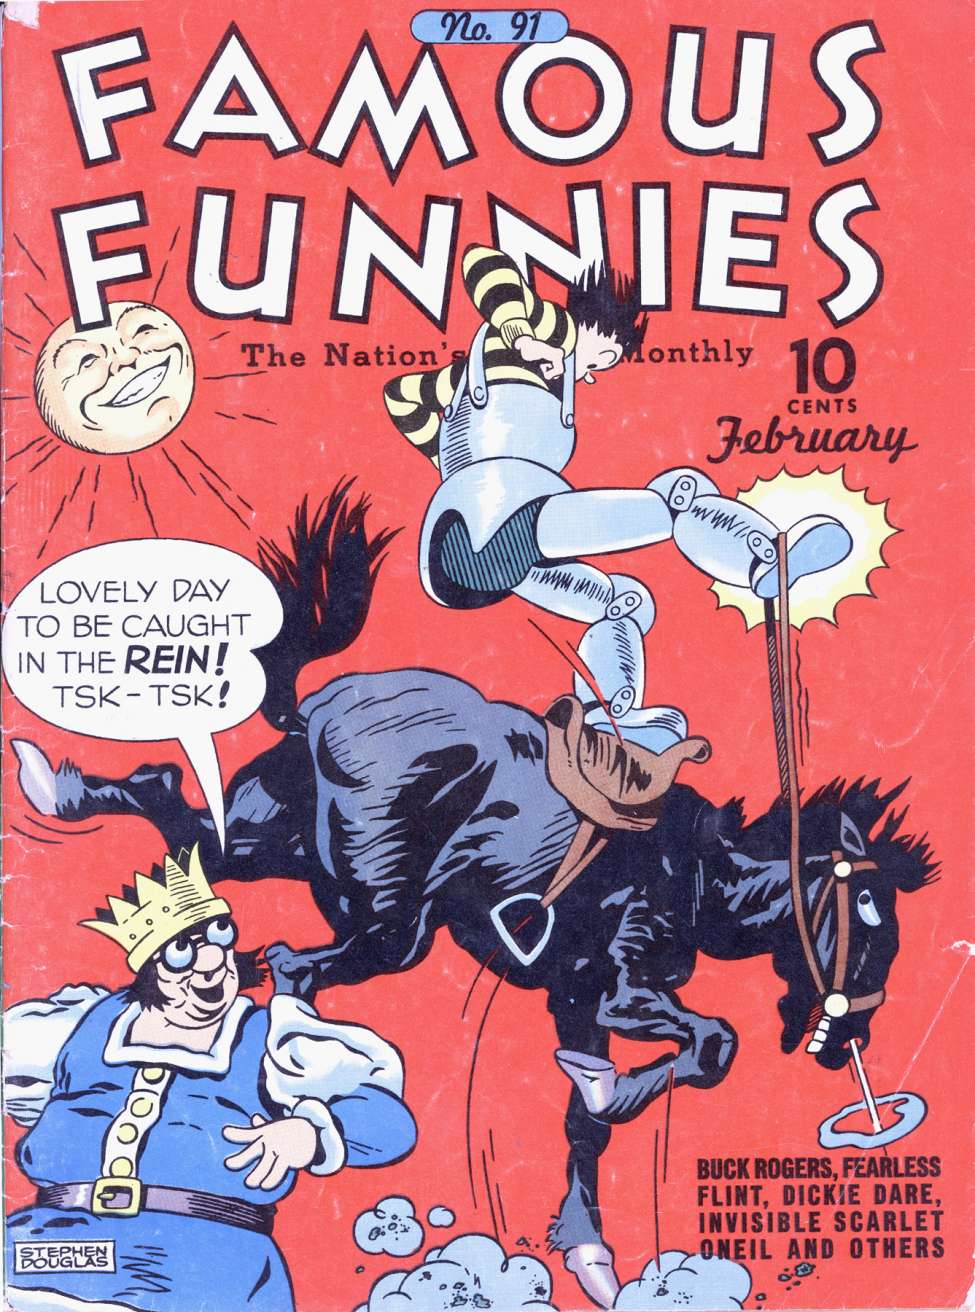 Book Cover For Famous Funnies 91